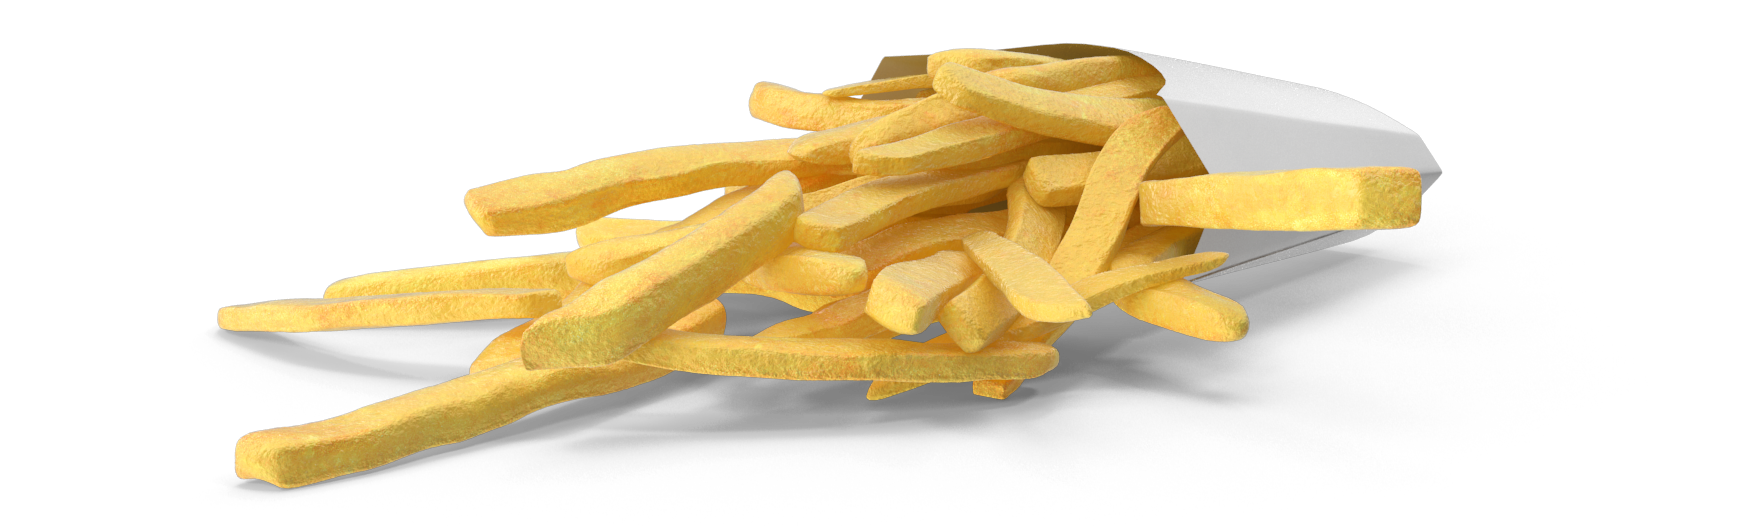 Fries in Data